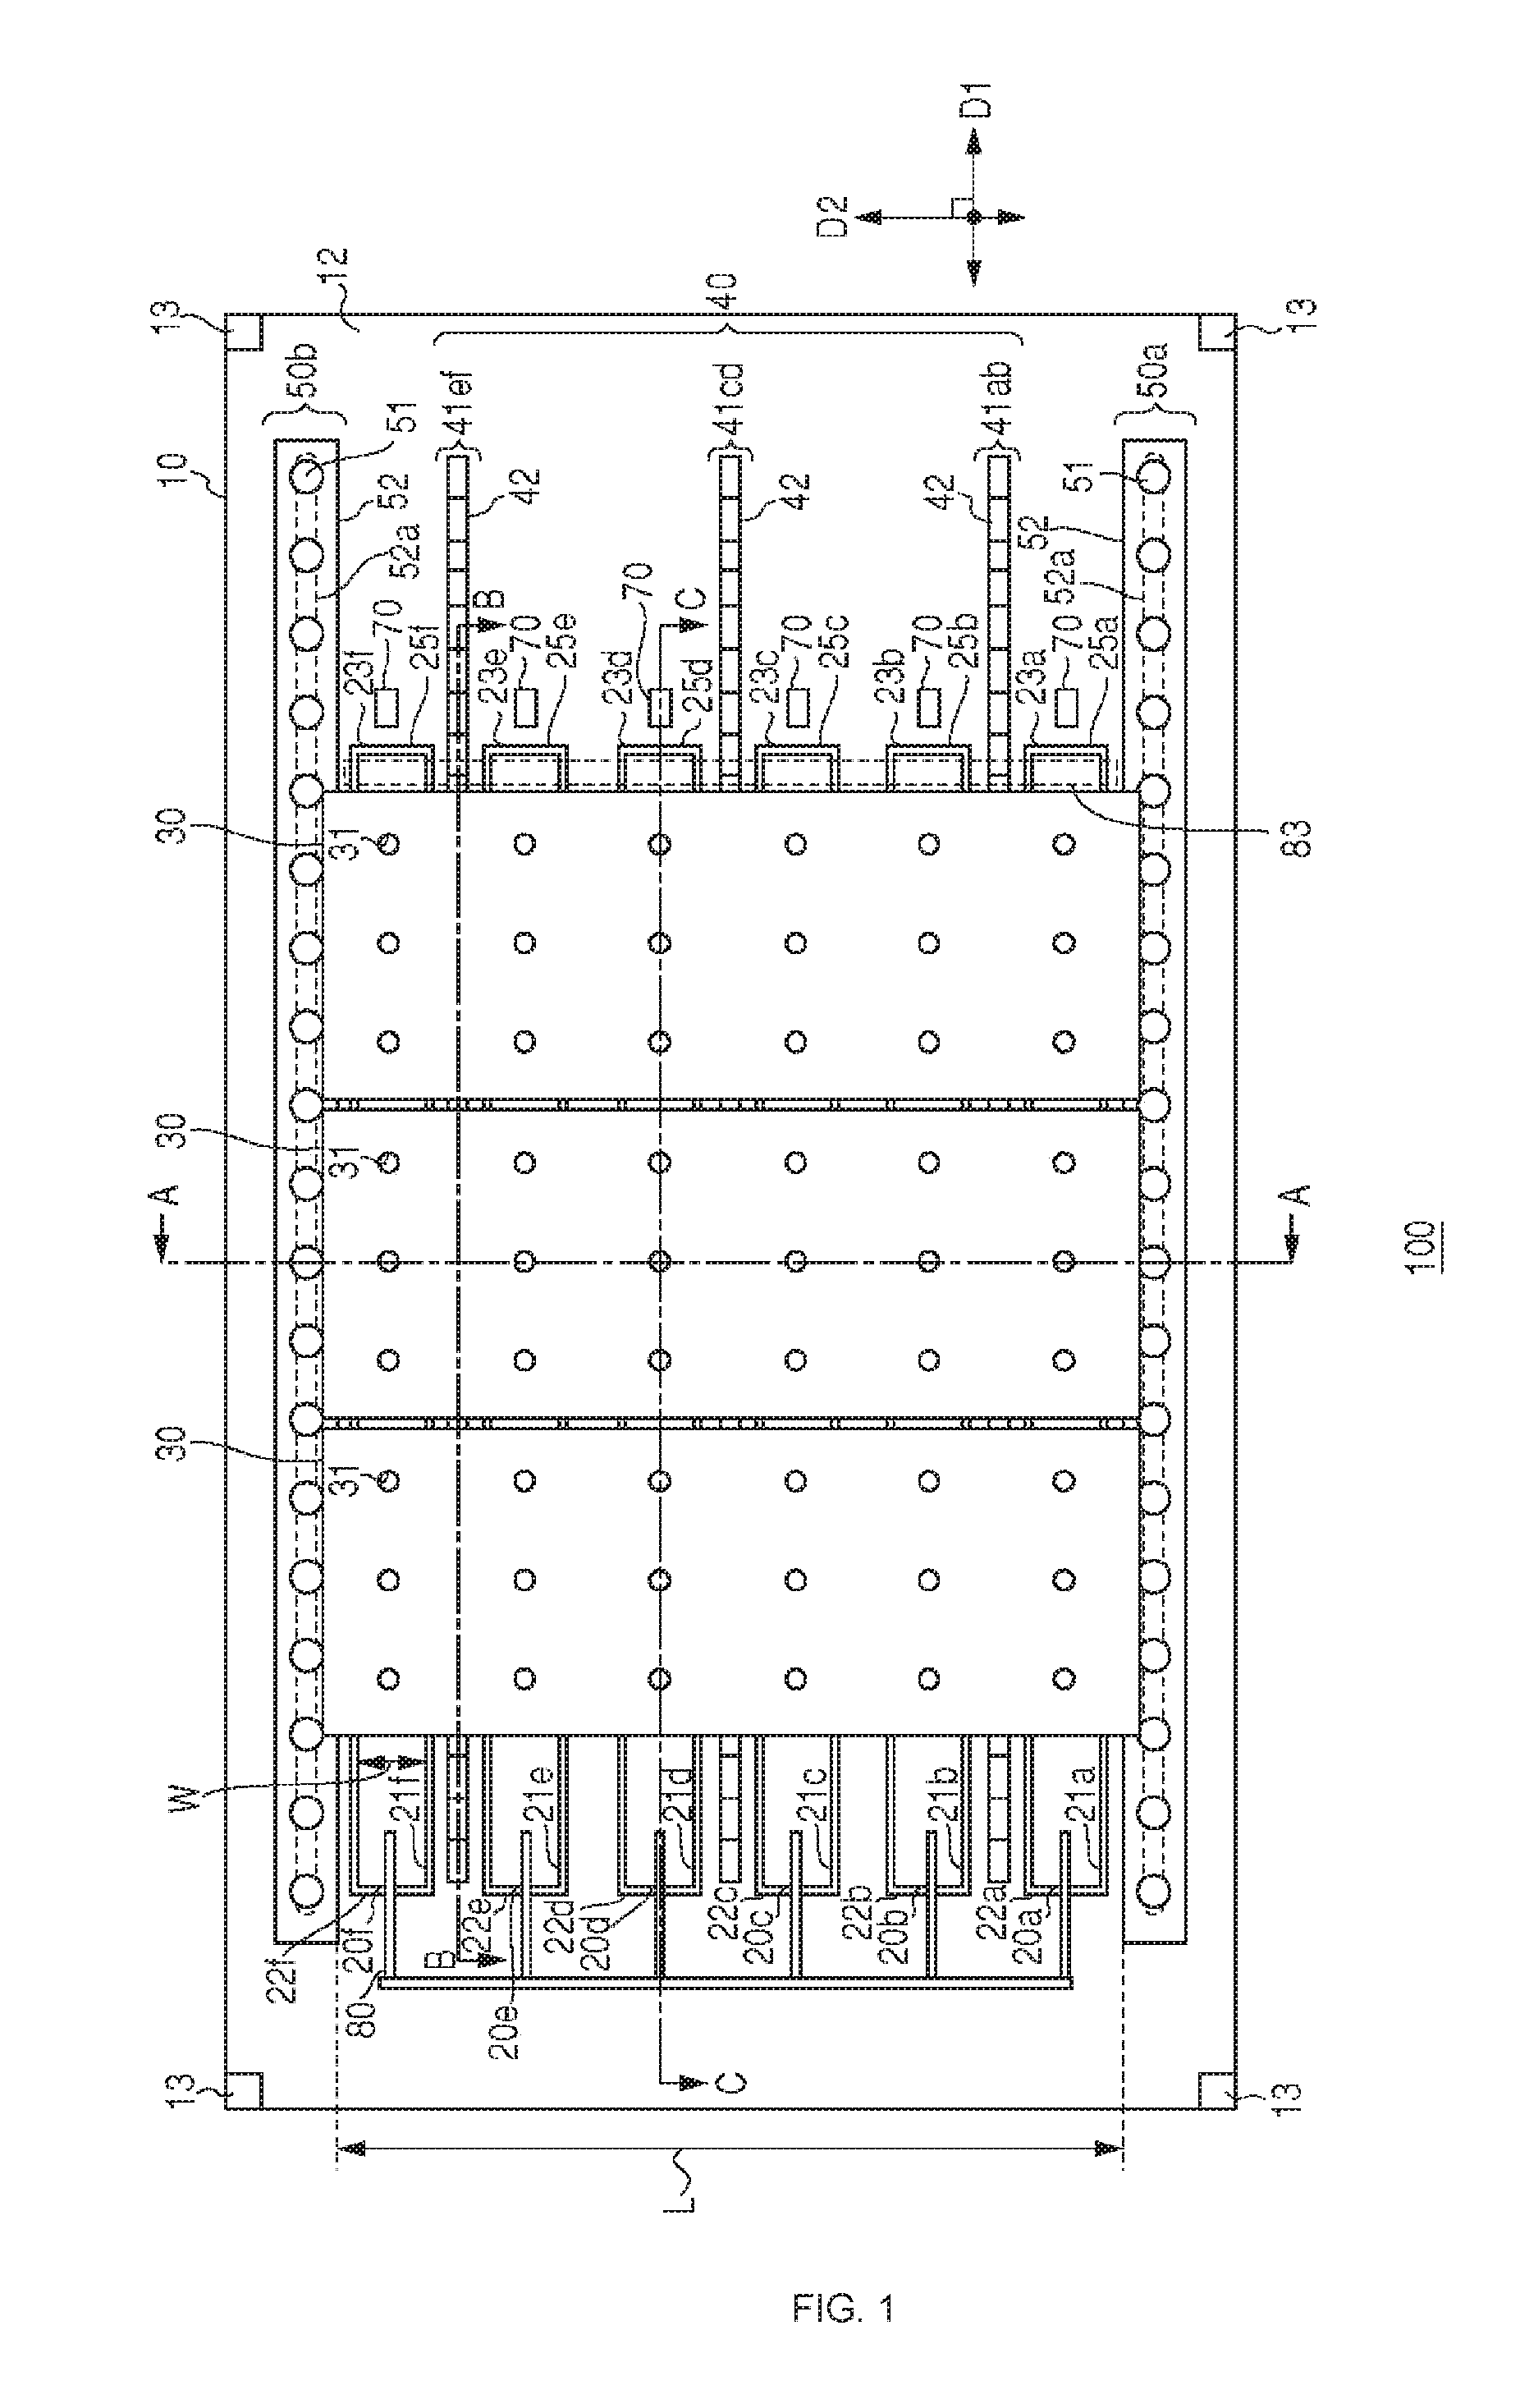 Hydroponic cultivation system, and plant factory comprising hydroponic cultivation system and expanded polystyrene foam greenhouse